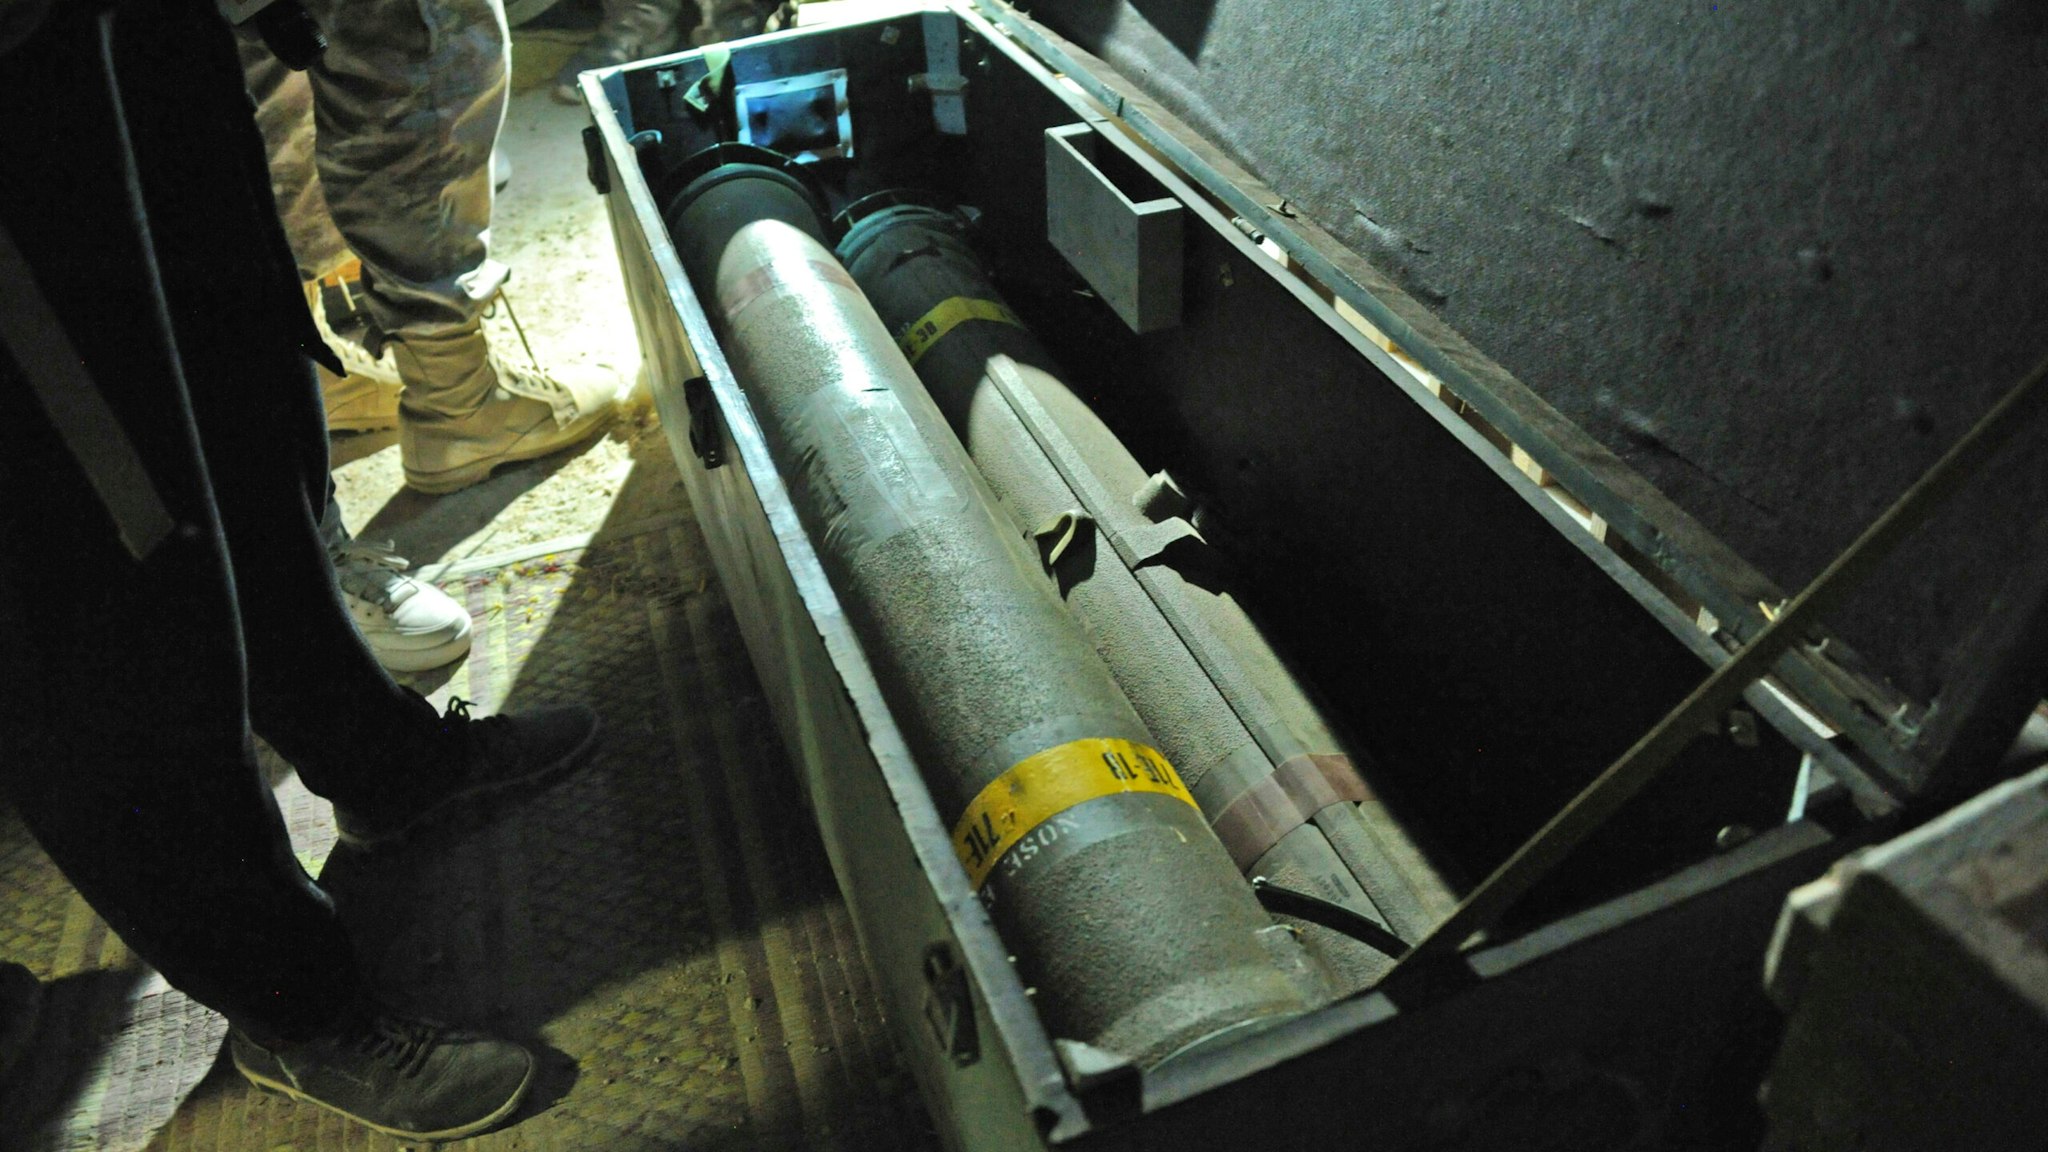 This picture taken on September 25, 2019 reportedly shows a crate of missiles in a weapons cache at a cave and tunnel system used by Syrian anti-government fighters near al-Lataminah in Hama province. - According to the Russian army, this vast underground network was used as a military base and habitation quarters by rebel fighters and as a workshop for making drones, and was abandoned as pro-government forces advanced on the area.